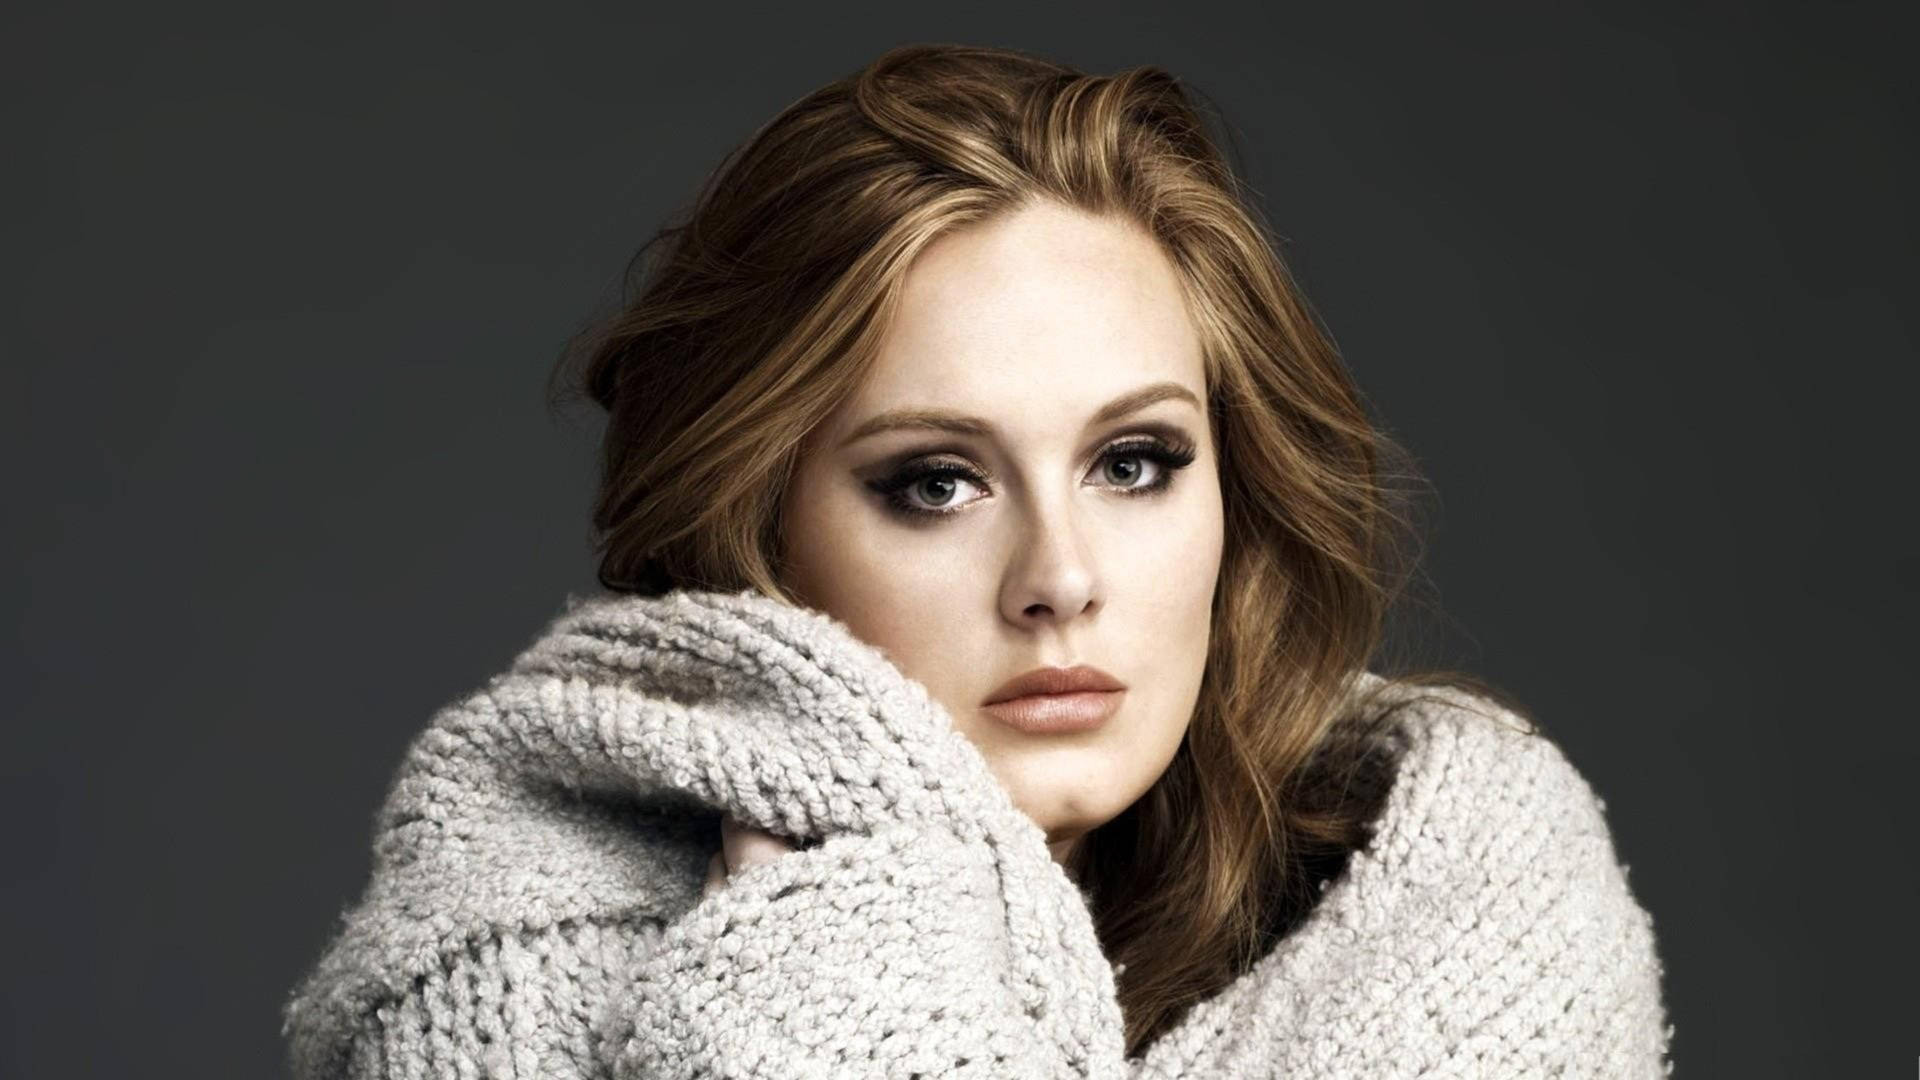 Adele In Sweater Background